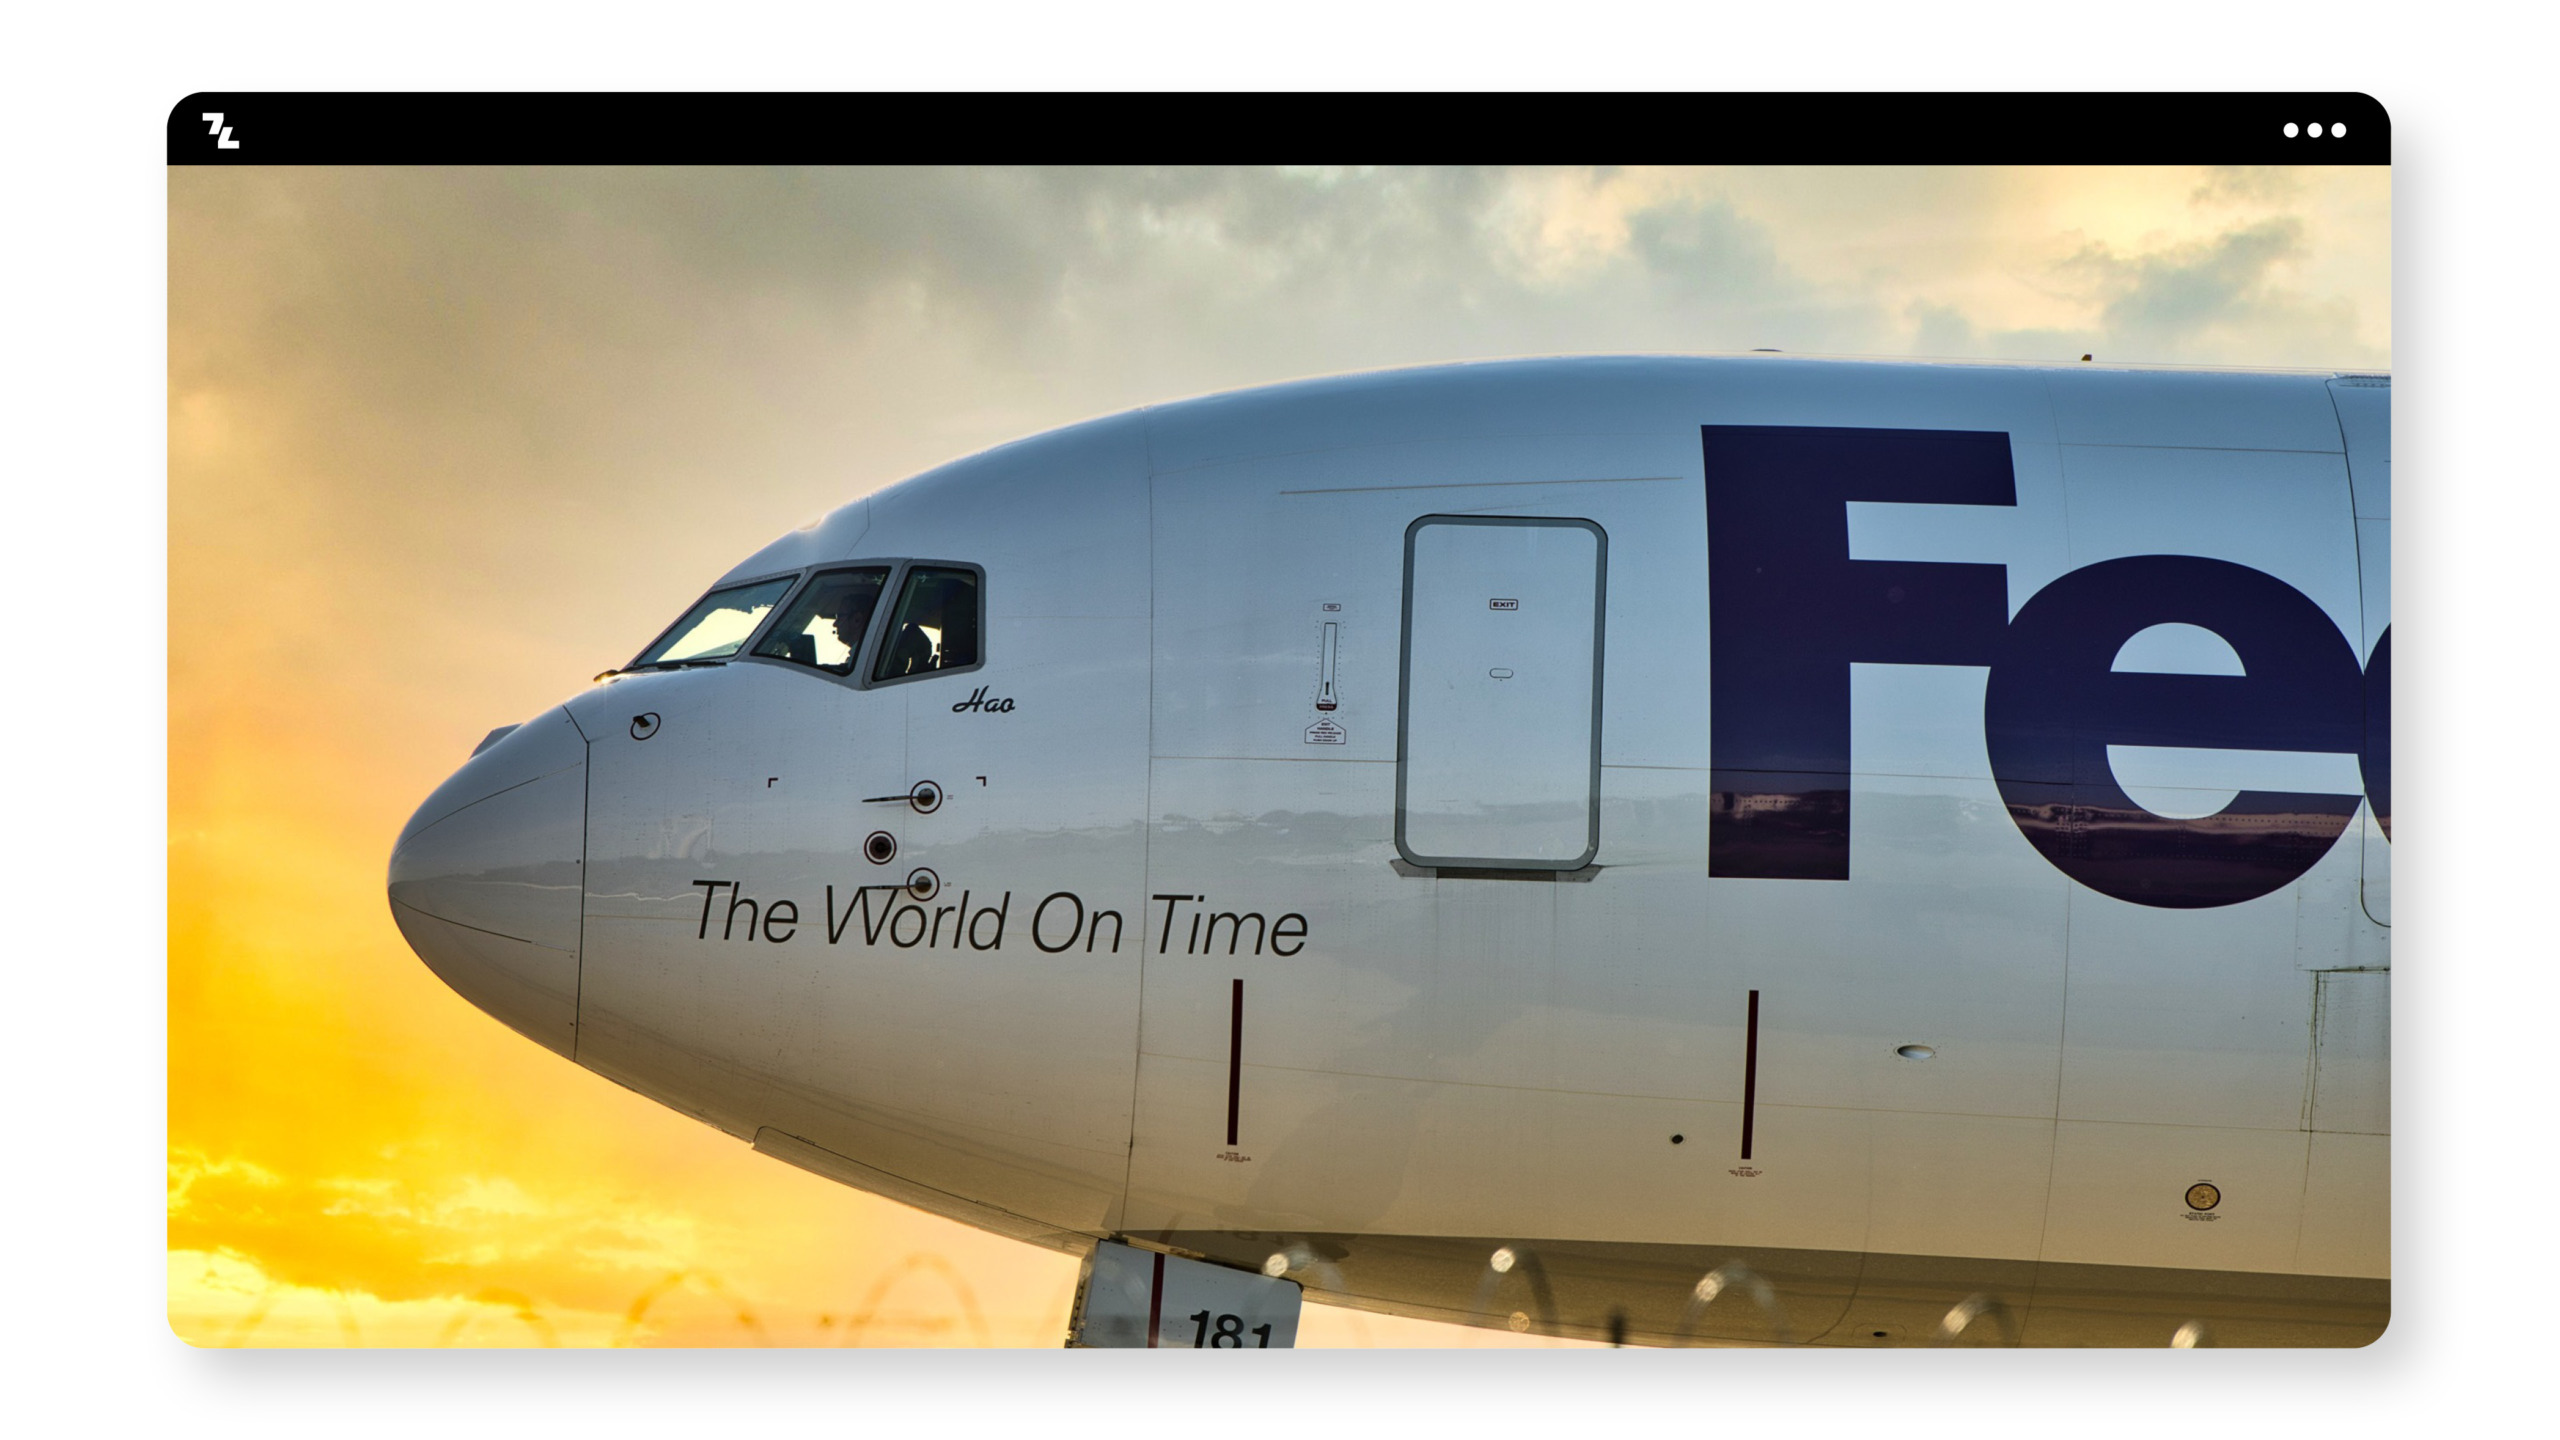 A FedEx plane is stationed at the airport, showcasing its unique selling proposition (USP) in logistics.